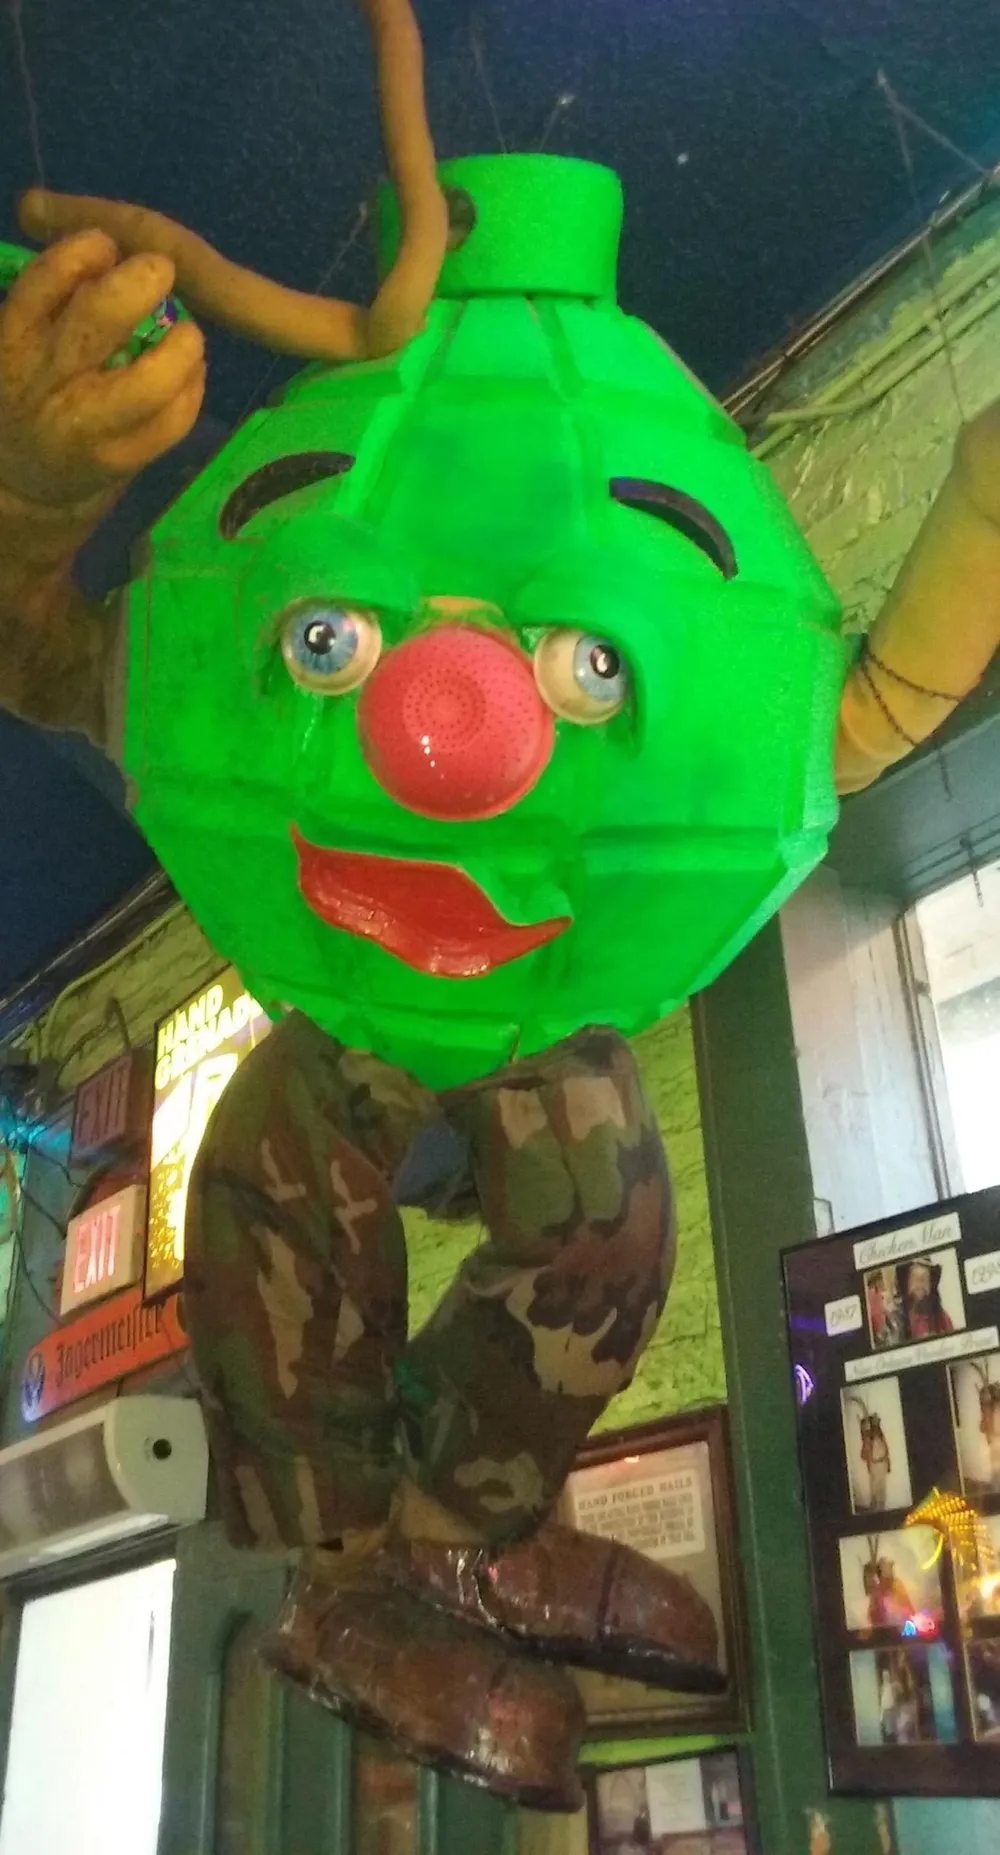 The image features a quirky oversized green character with a red clown nose and camouflage pants hanging from a ceiling being adjusted by a persons hand